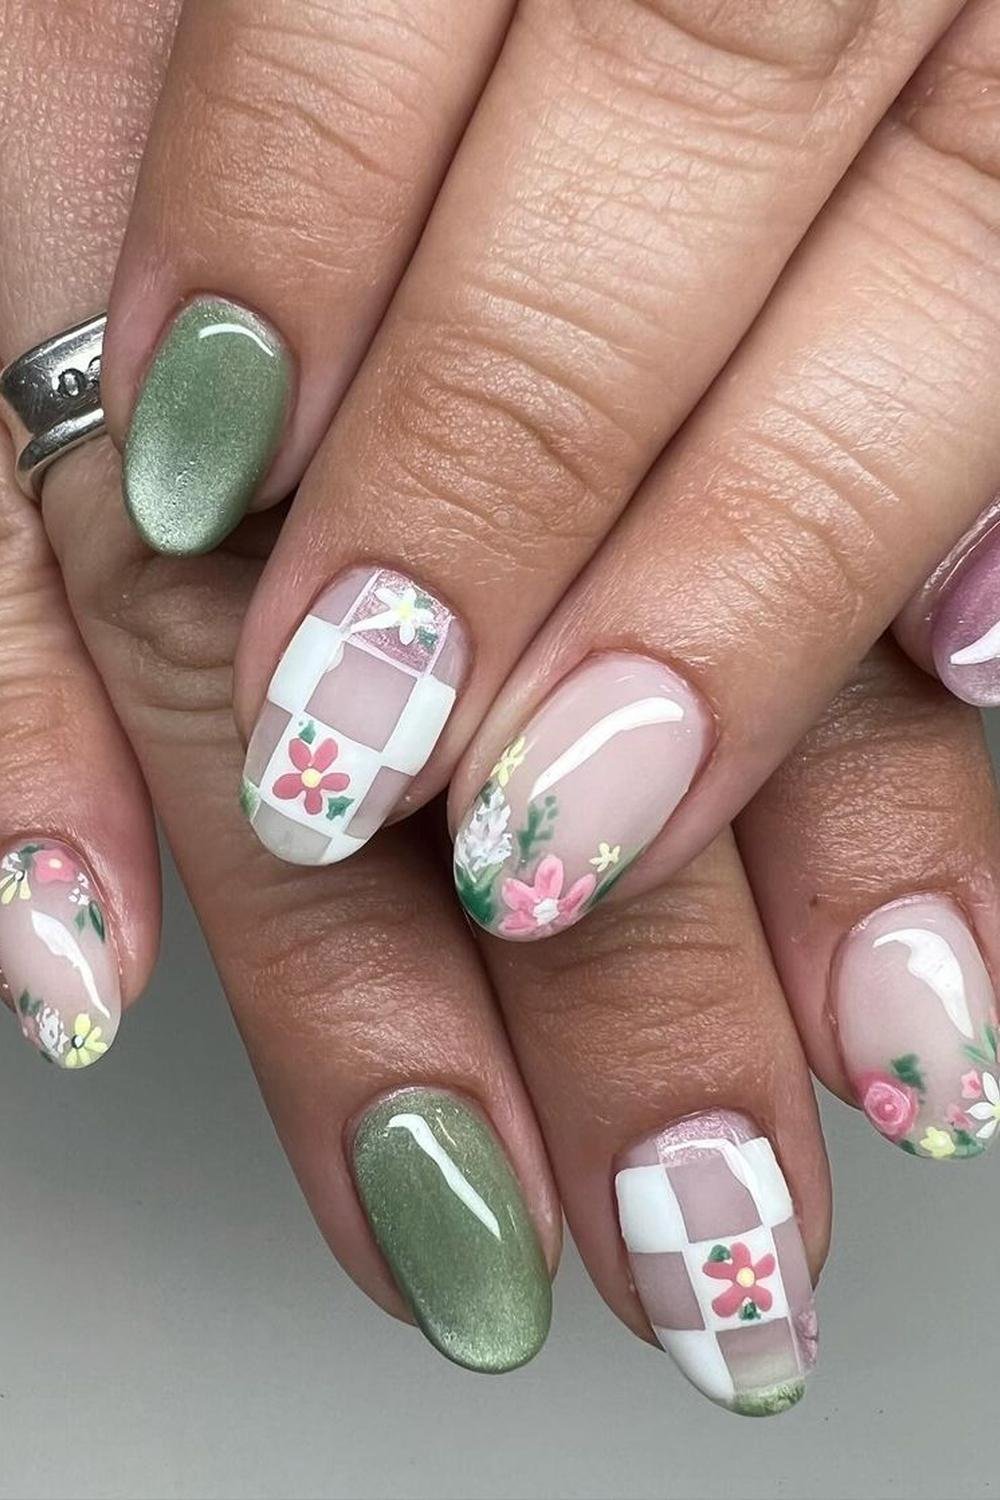 21 - Picture of Whimsical Nails